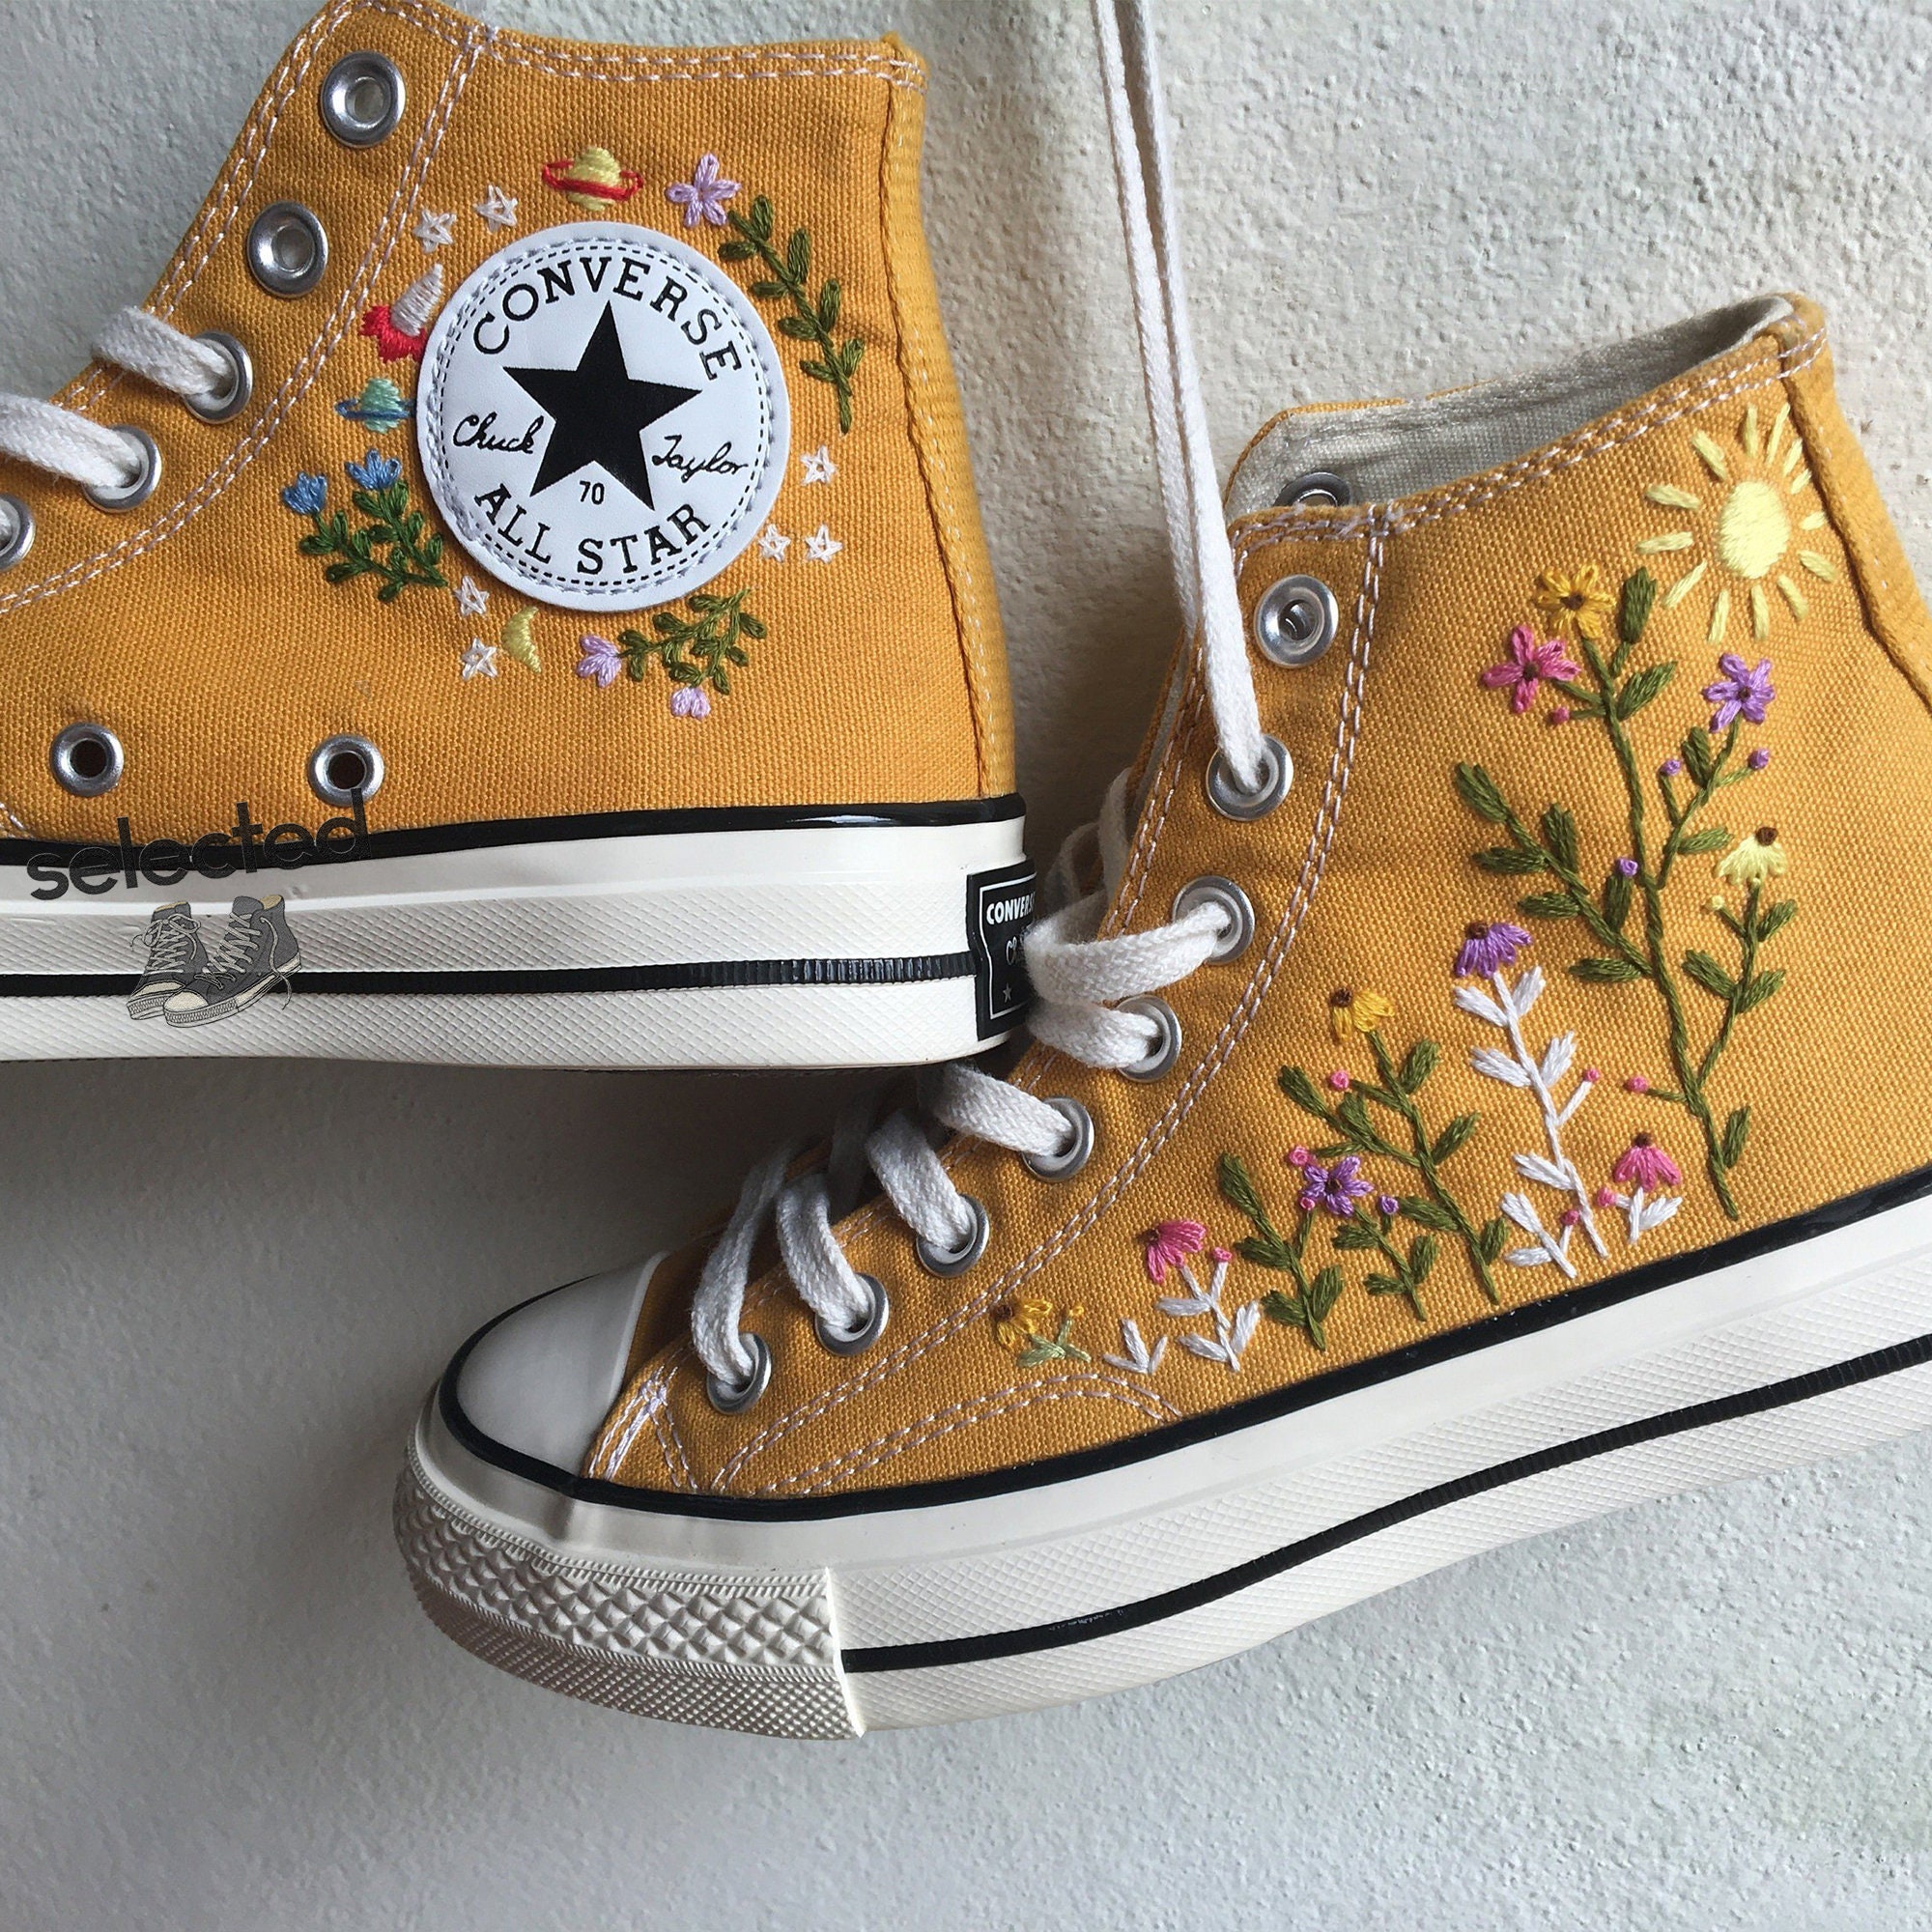 Custom Floral Embroidered Chuck Taylor 1970s Converse